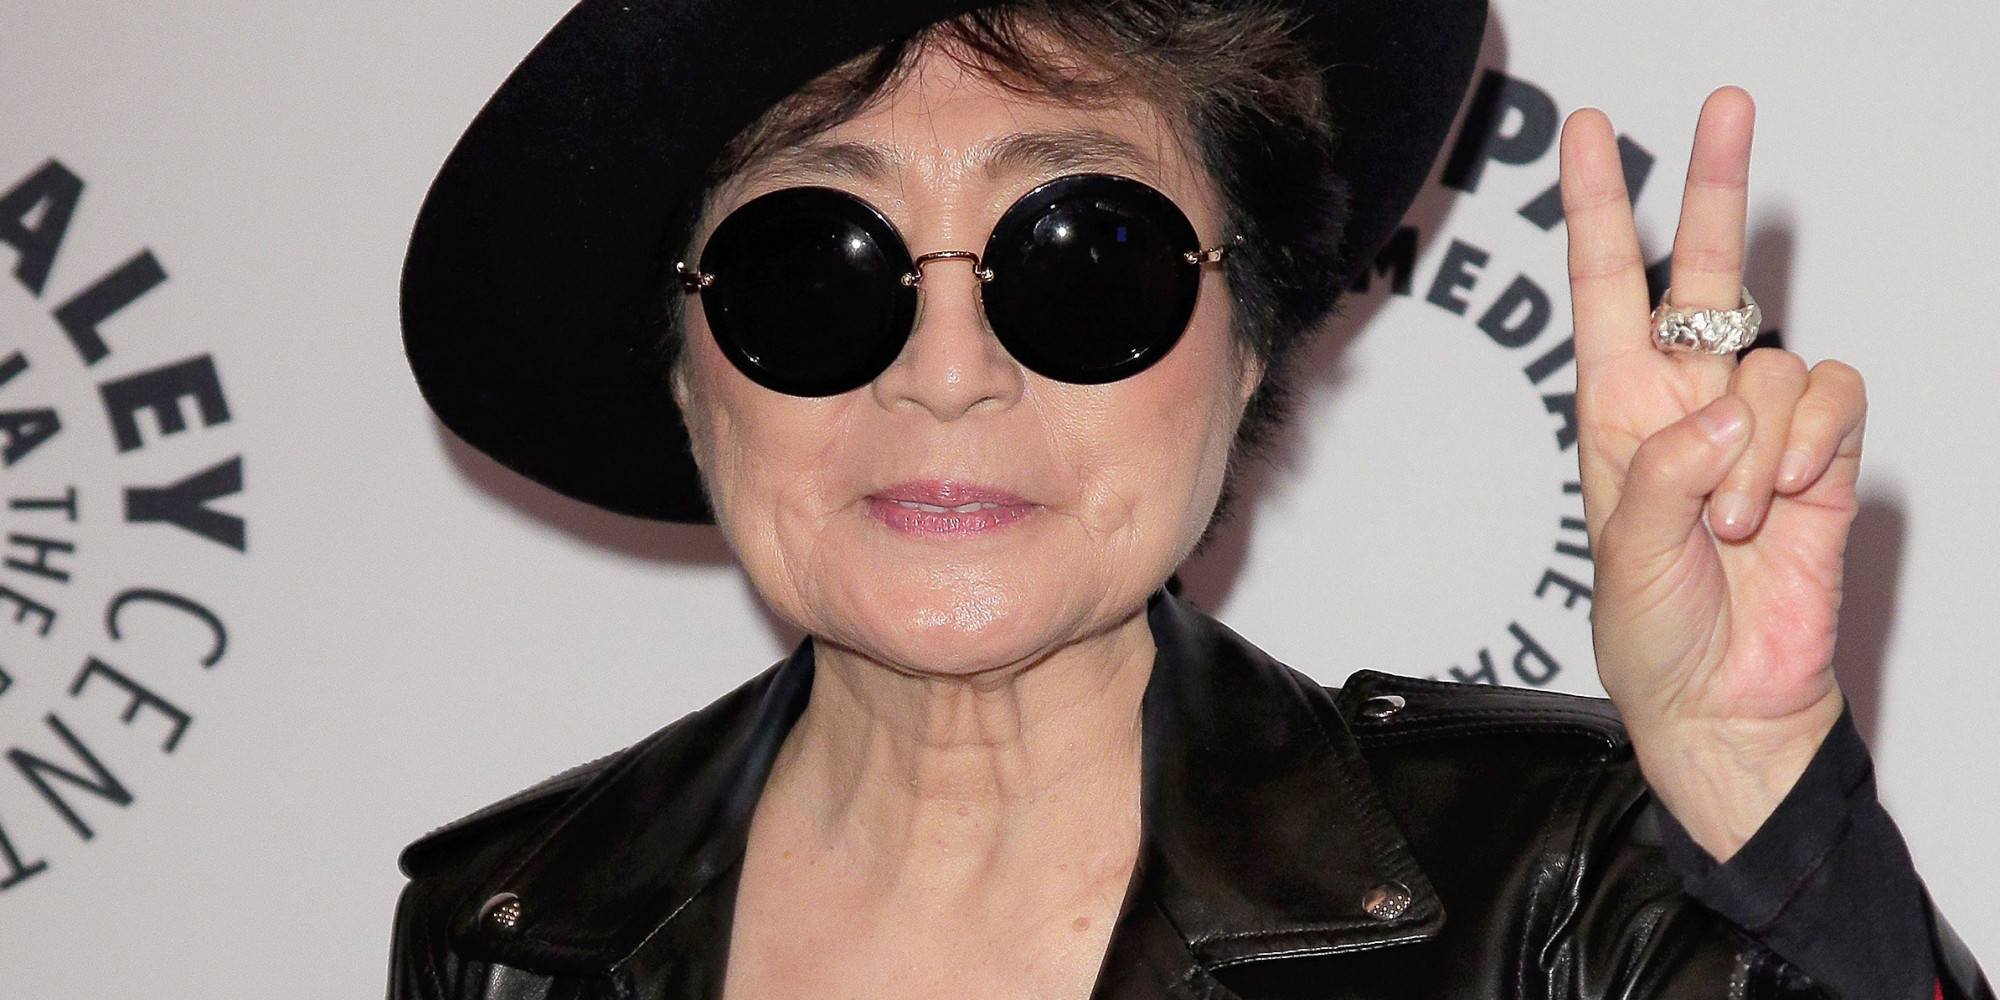 NEW YORK, NY - NOVEMBER 11:  Yoko Ono attends the Paley Center For Media Presents: An Evening With Yoko Ono at Paley Center For Media on November 11, 2014 in New York City.  (Photo by Randy Brooke/WireImage)